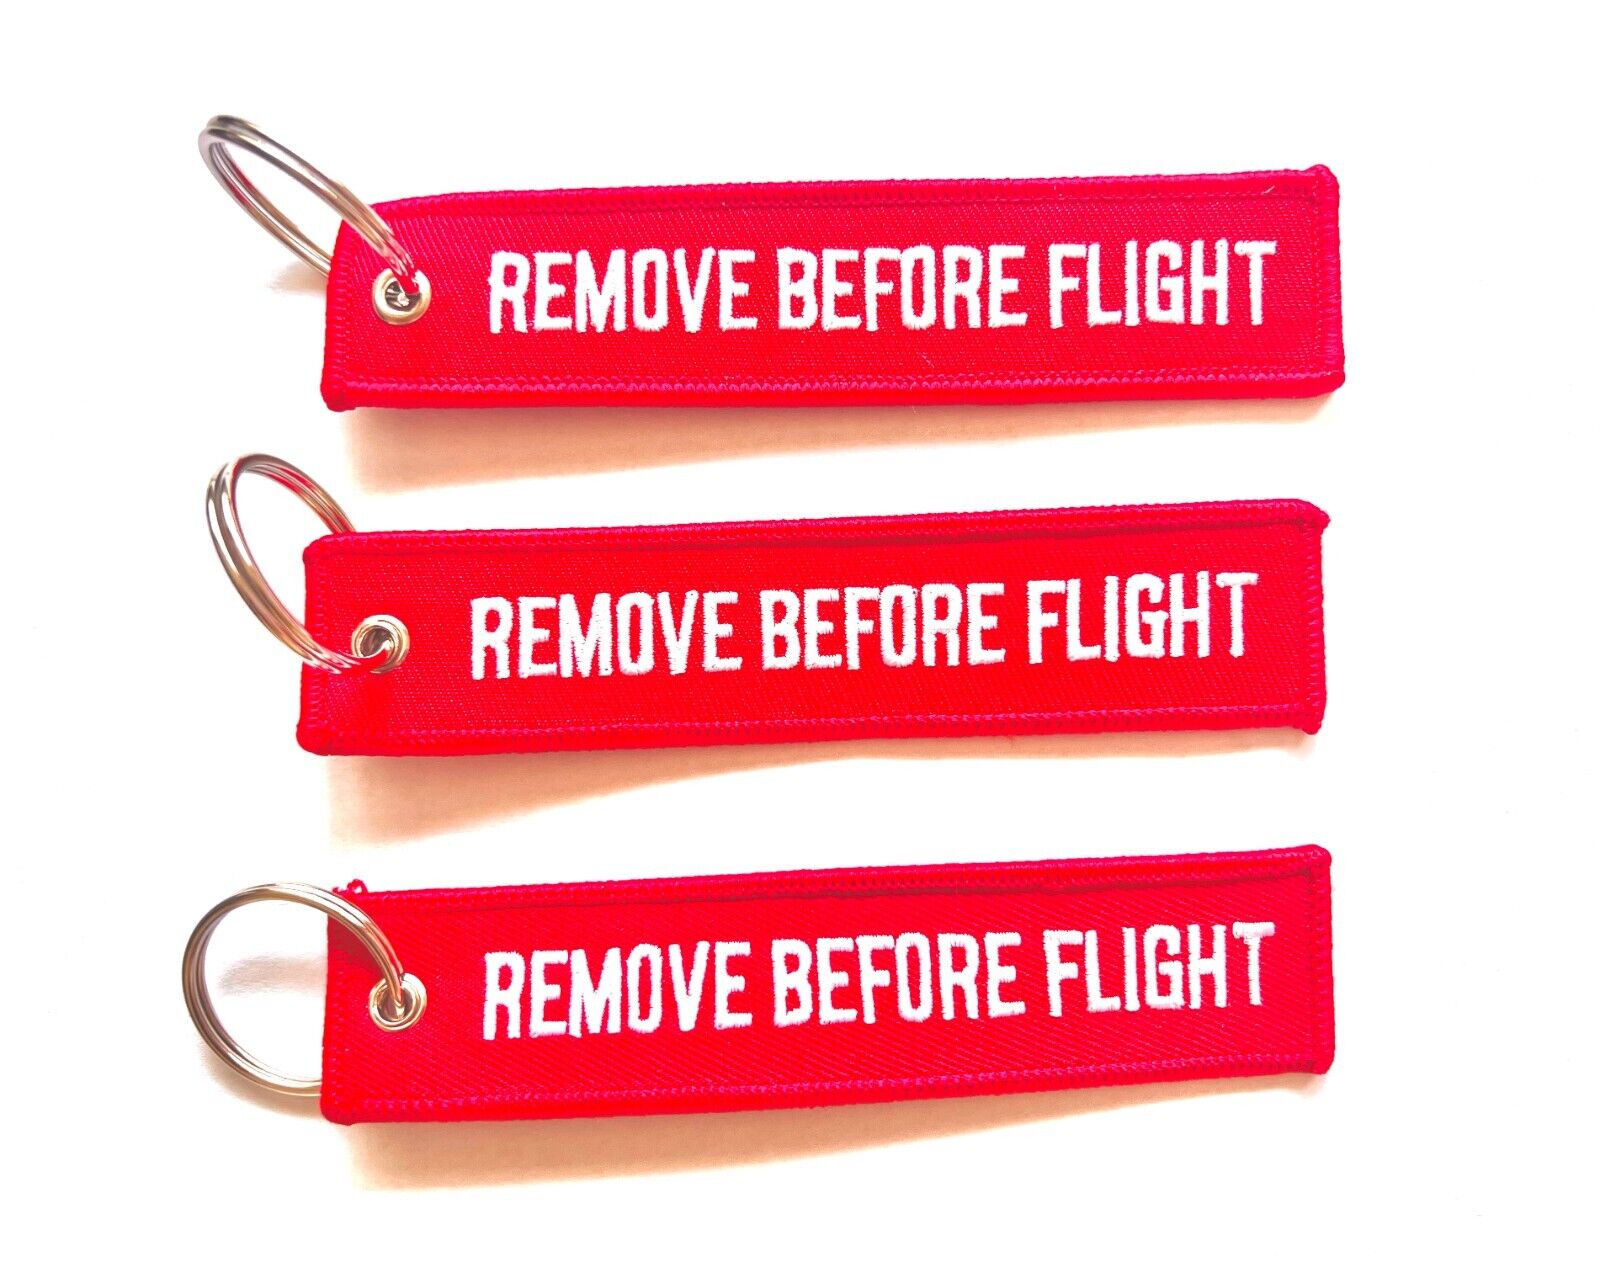 REMOVE BEFORE FLIGHT KEYCHAIN 3 PACK